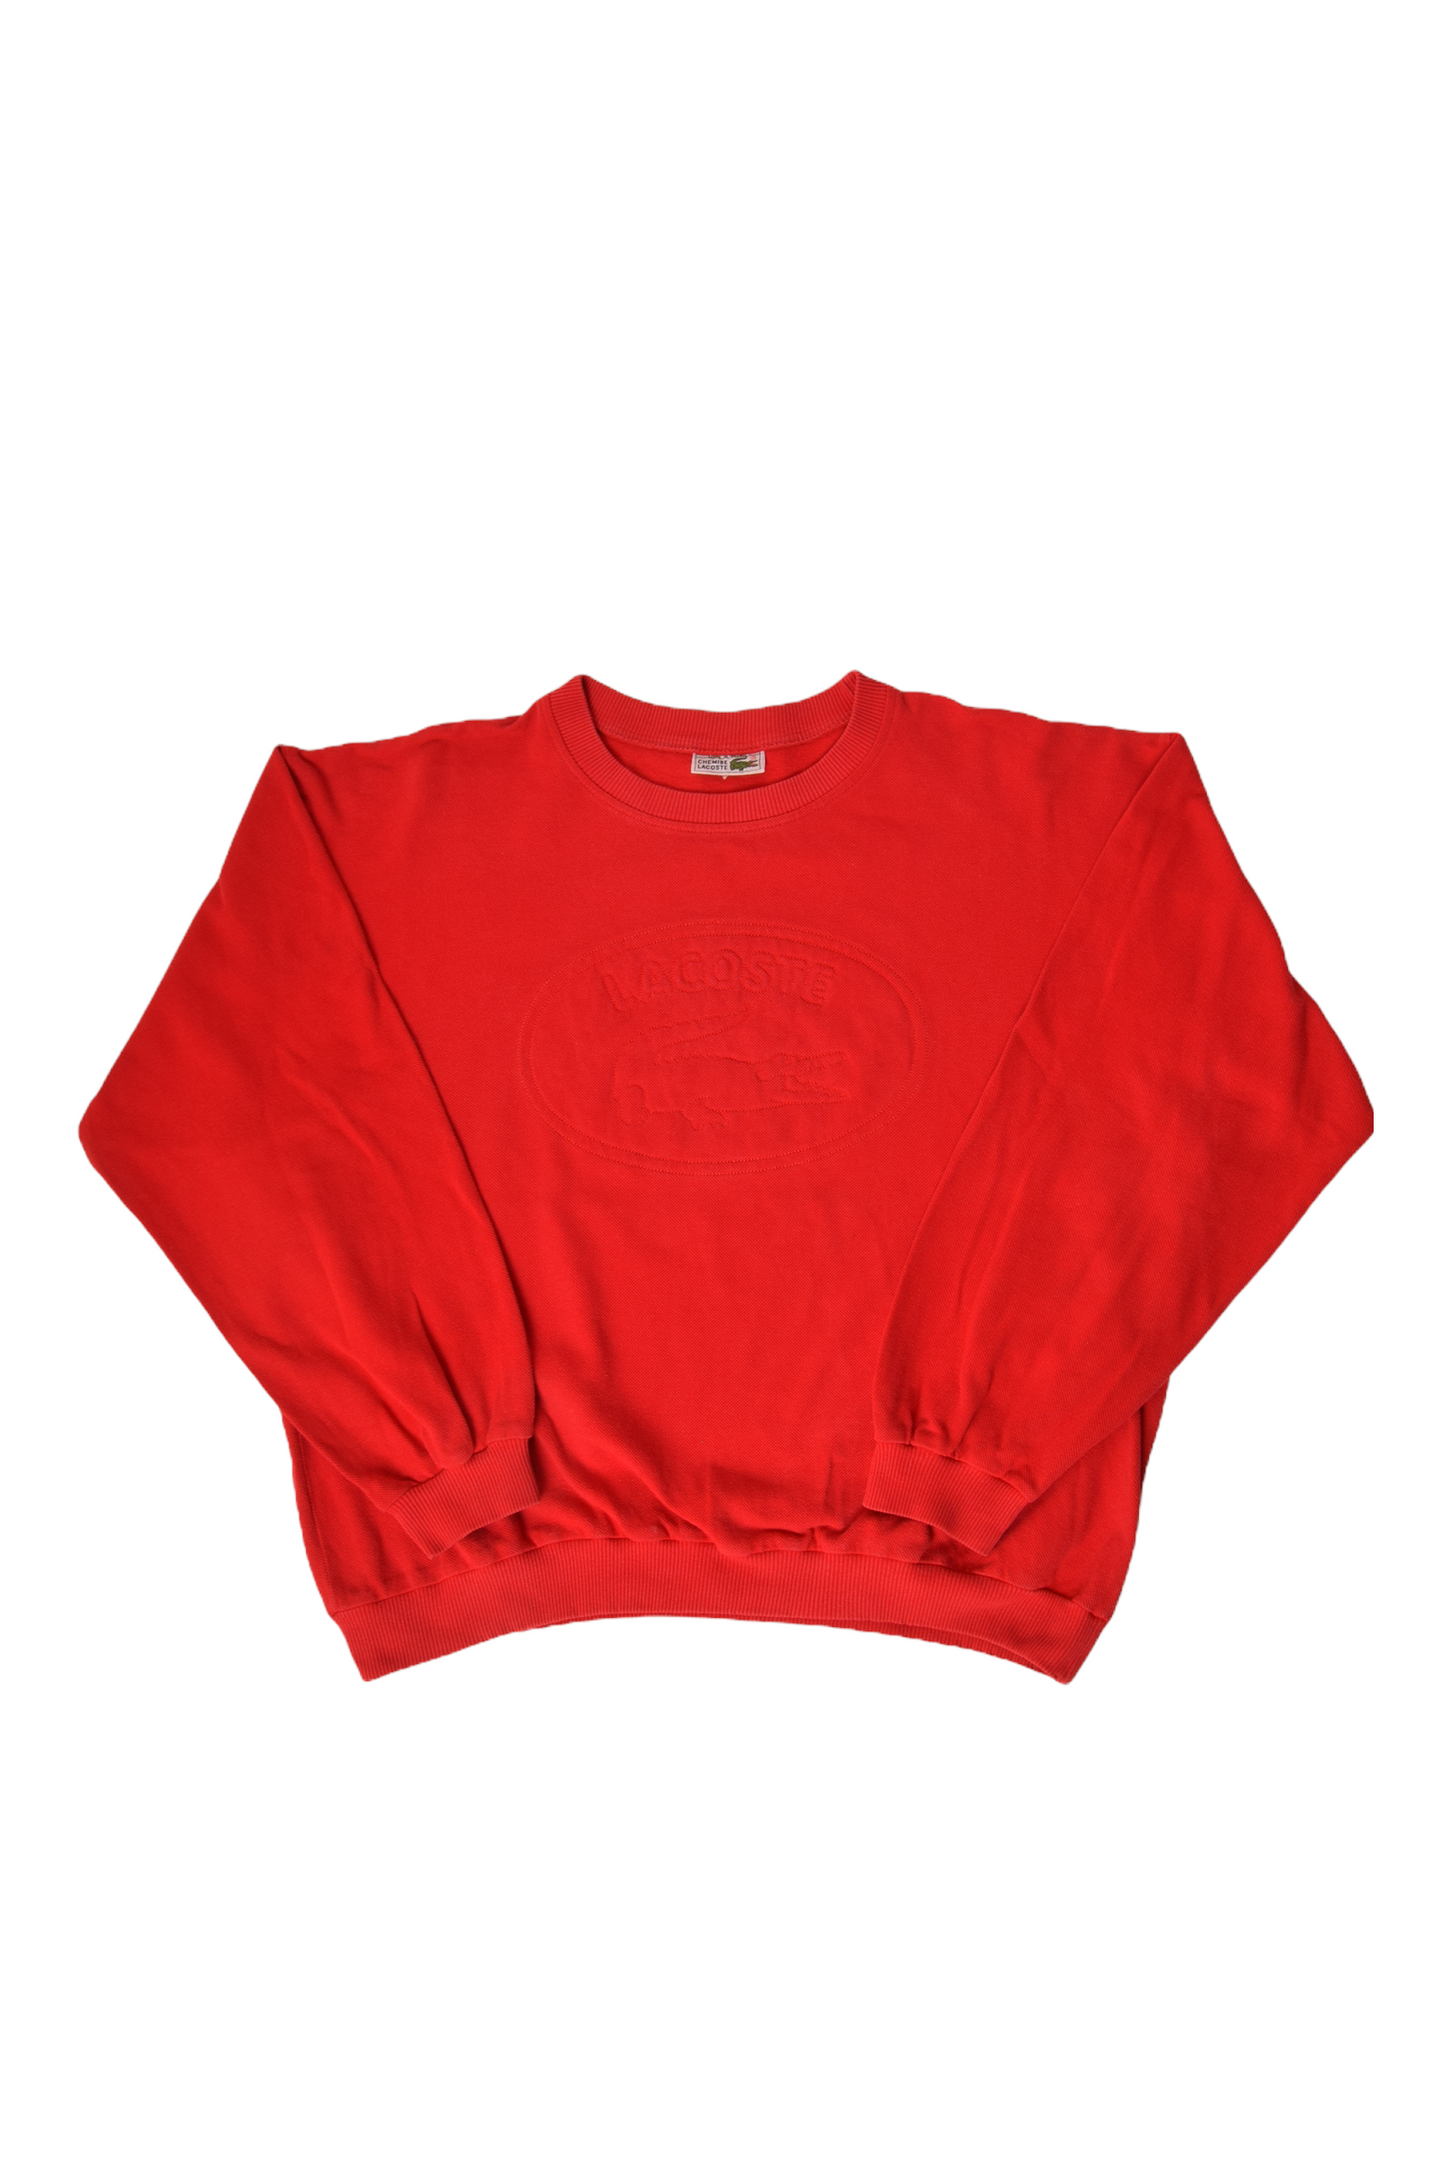 Vintage 80's Lacoste Pique Sweatshirt Crew Neck Embroidered Logo Made in France Size L-XL 100% Cotton Red